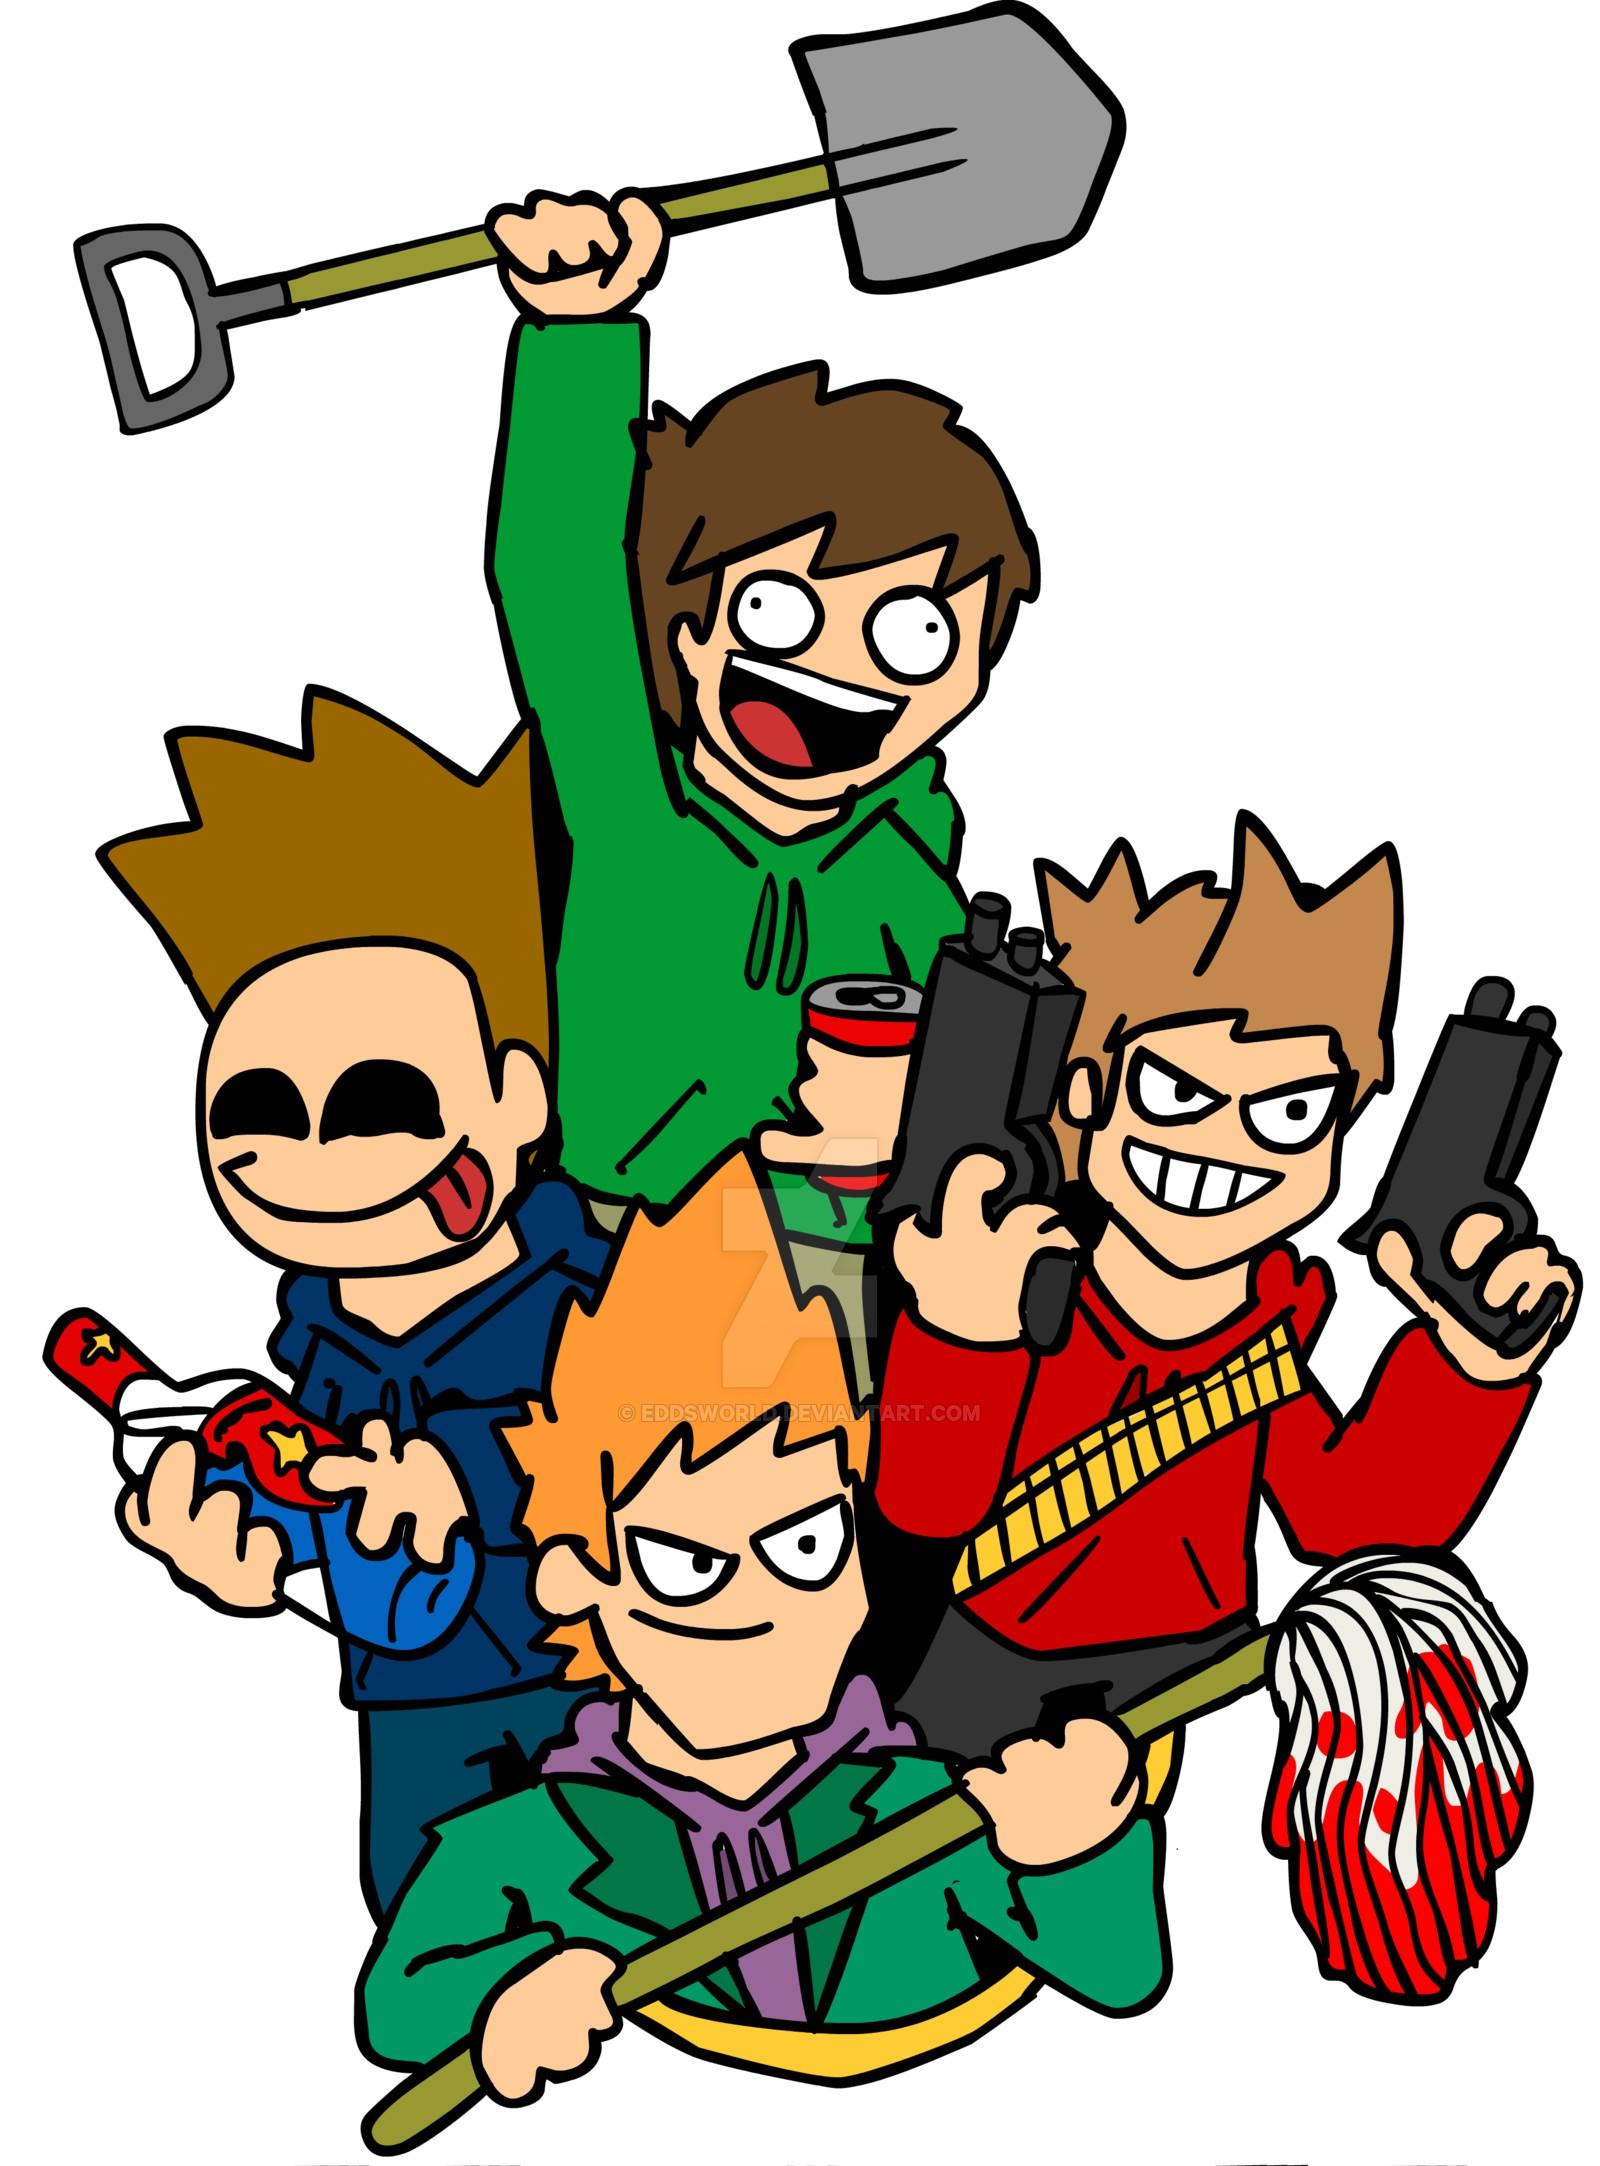 Eddsworld: The End of a Legacy. The Young Folks